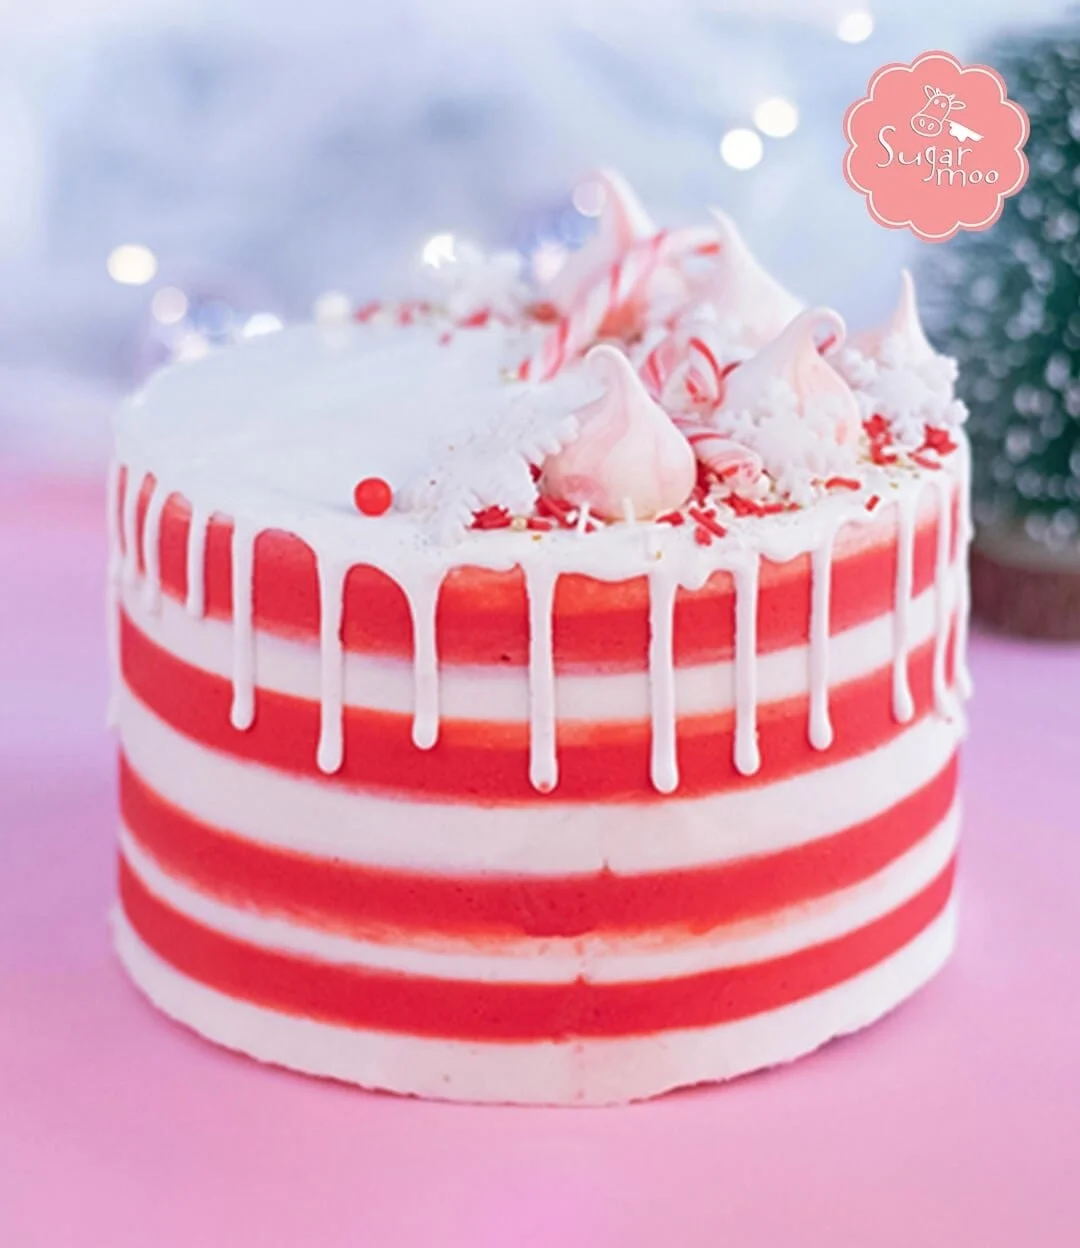 Peppermint Chocolate Candy Land Cake by Sugarmoo 